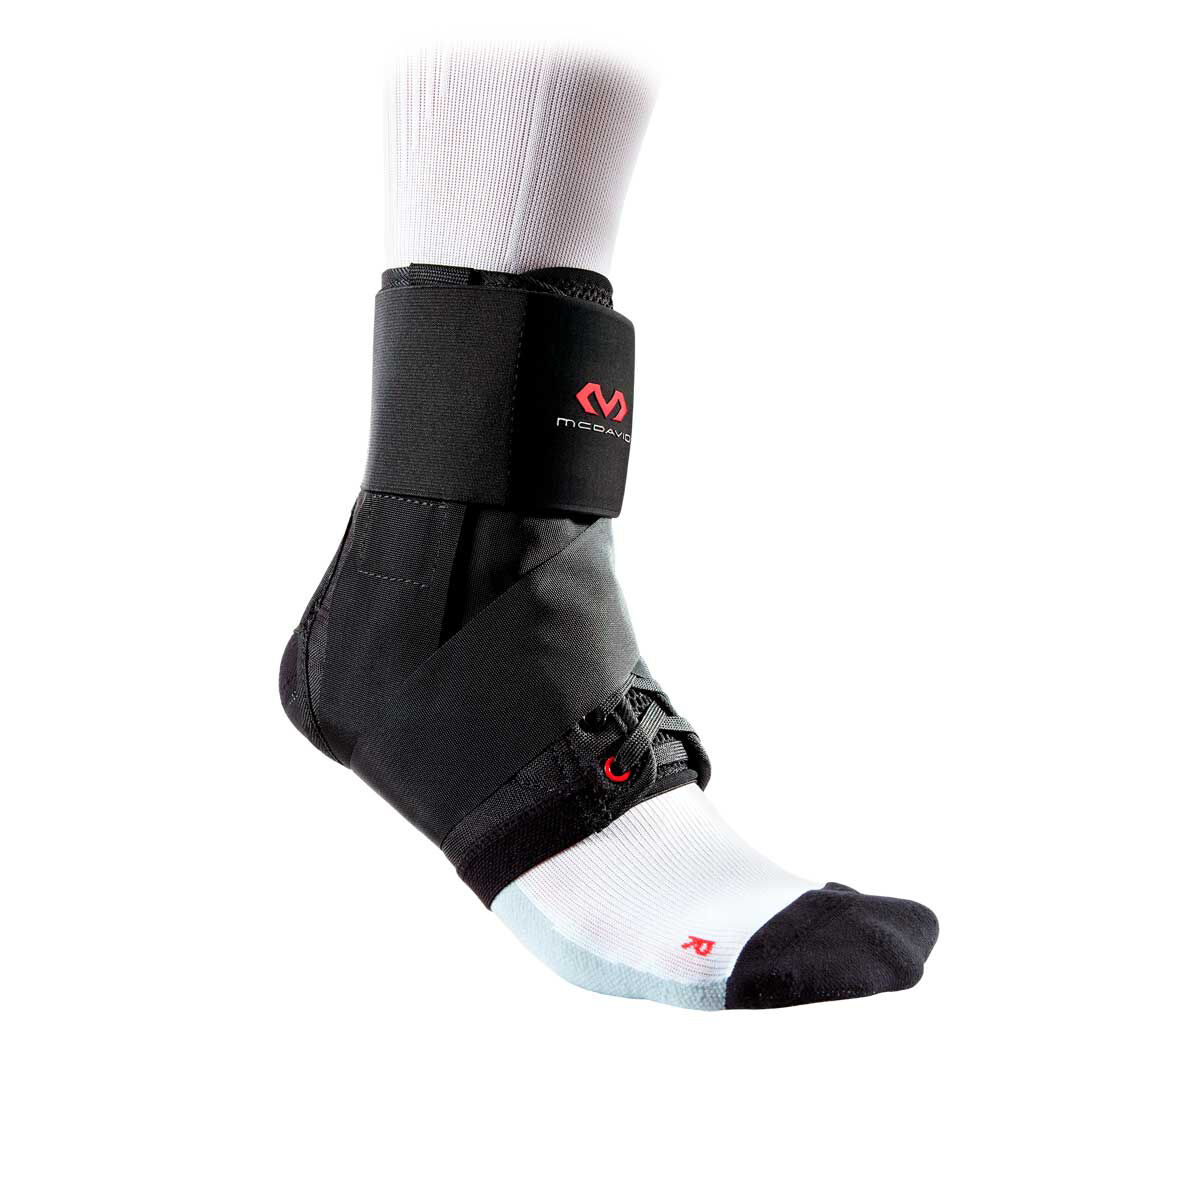 Ankle Brace For Netball Basketball or Hockey Aussie Company Melbourne Based 